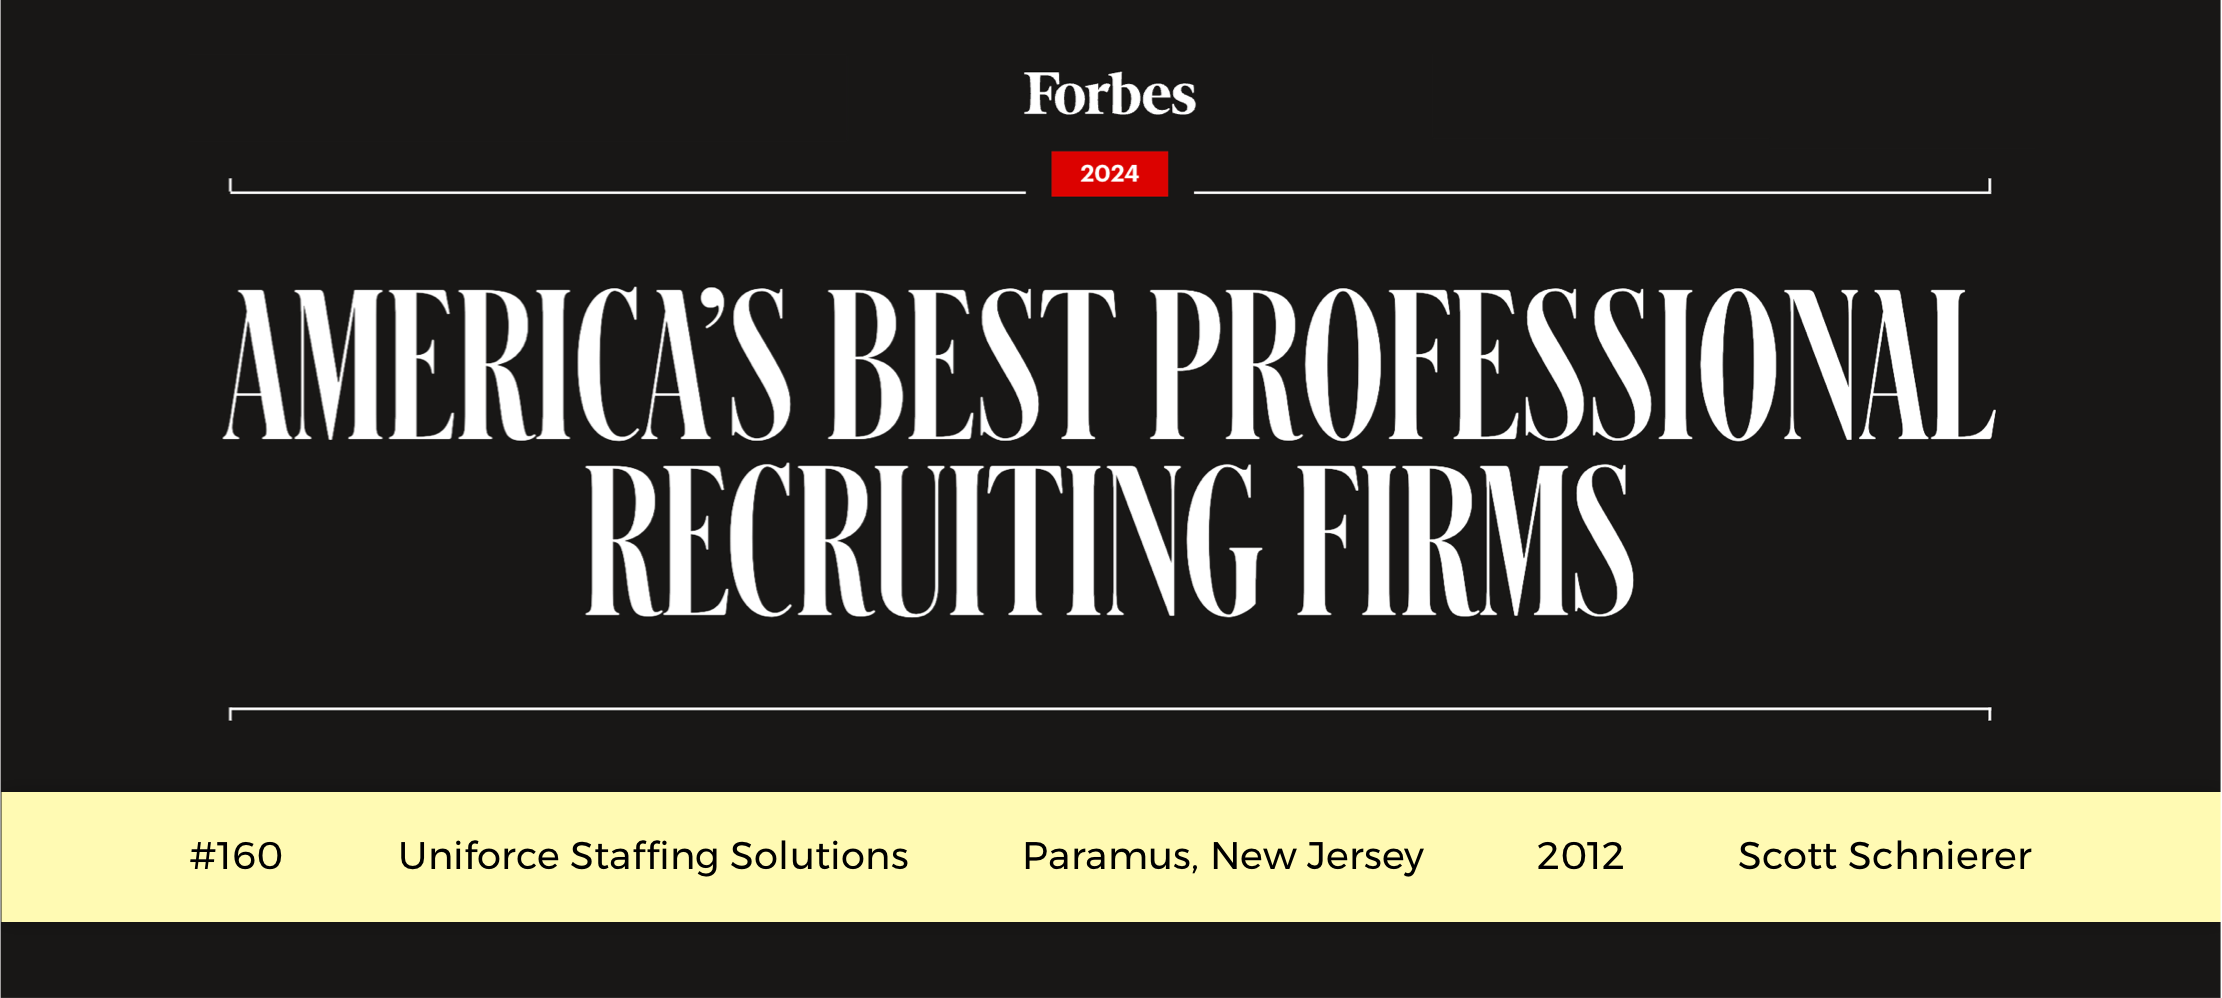 UNIFORCE named on the Forbes 2024 List of America’s Best Professional Recruiting Firms